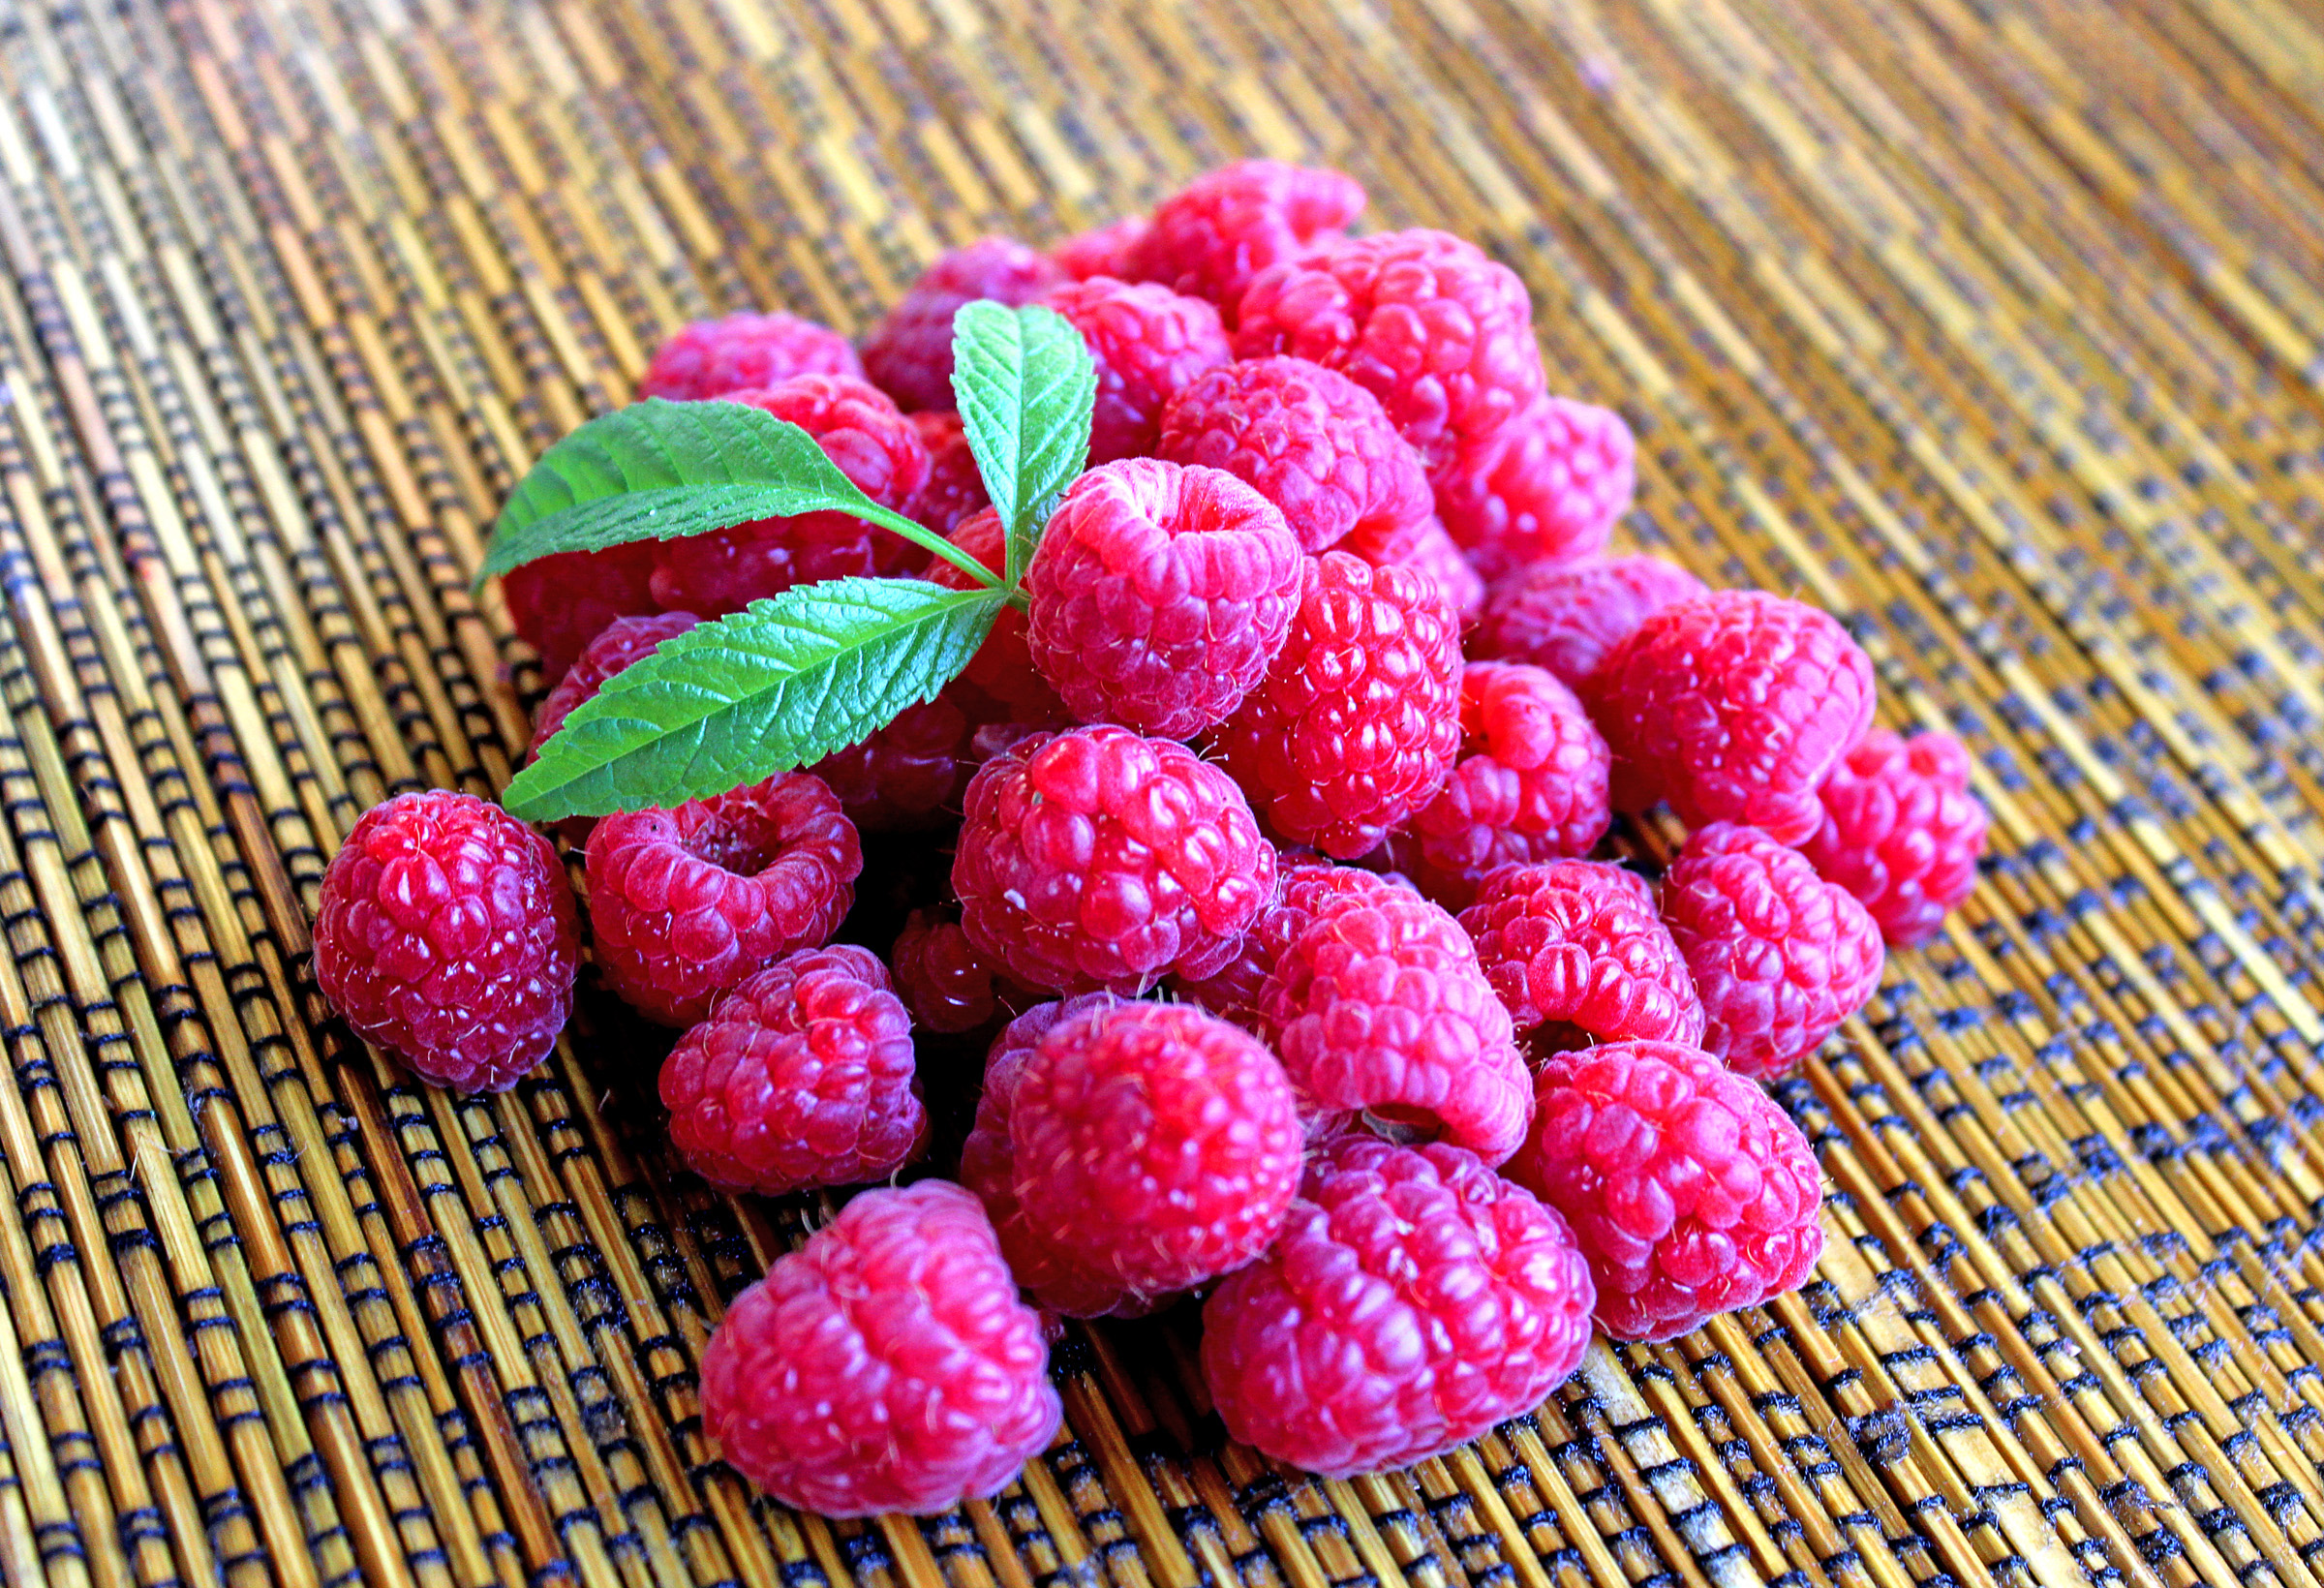 Raspberries on the table with leaves photo